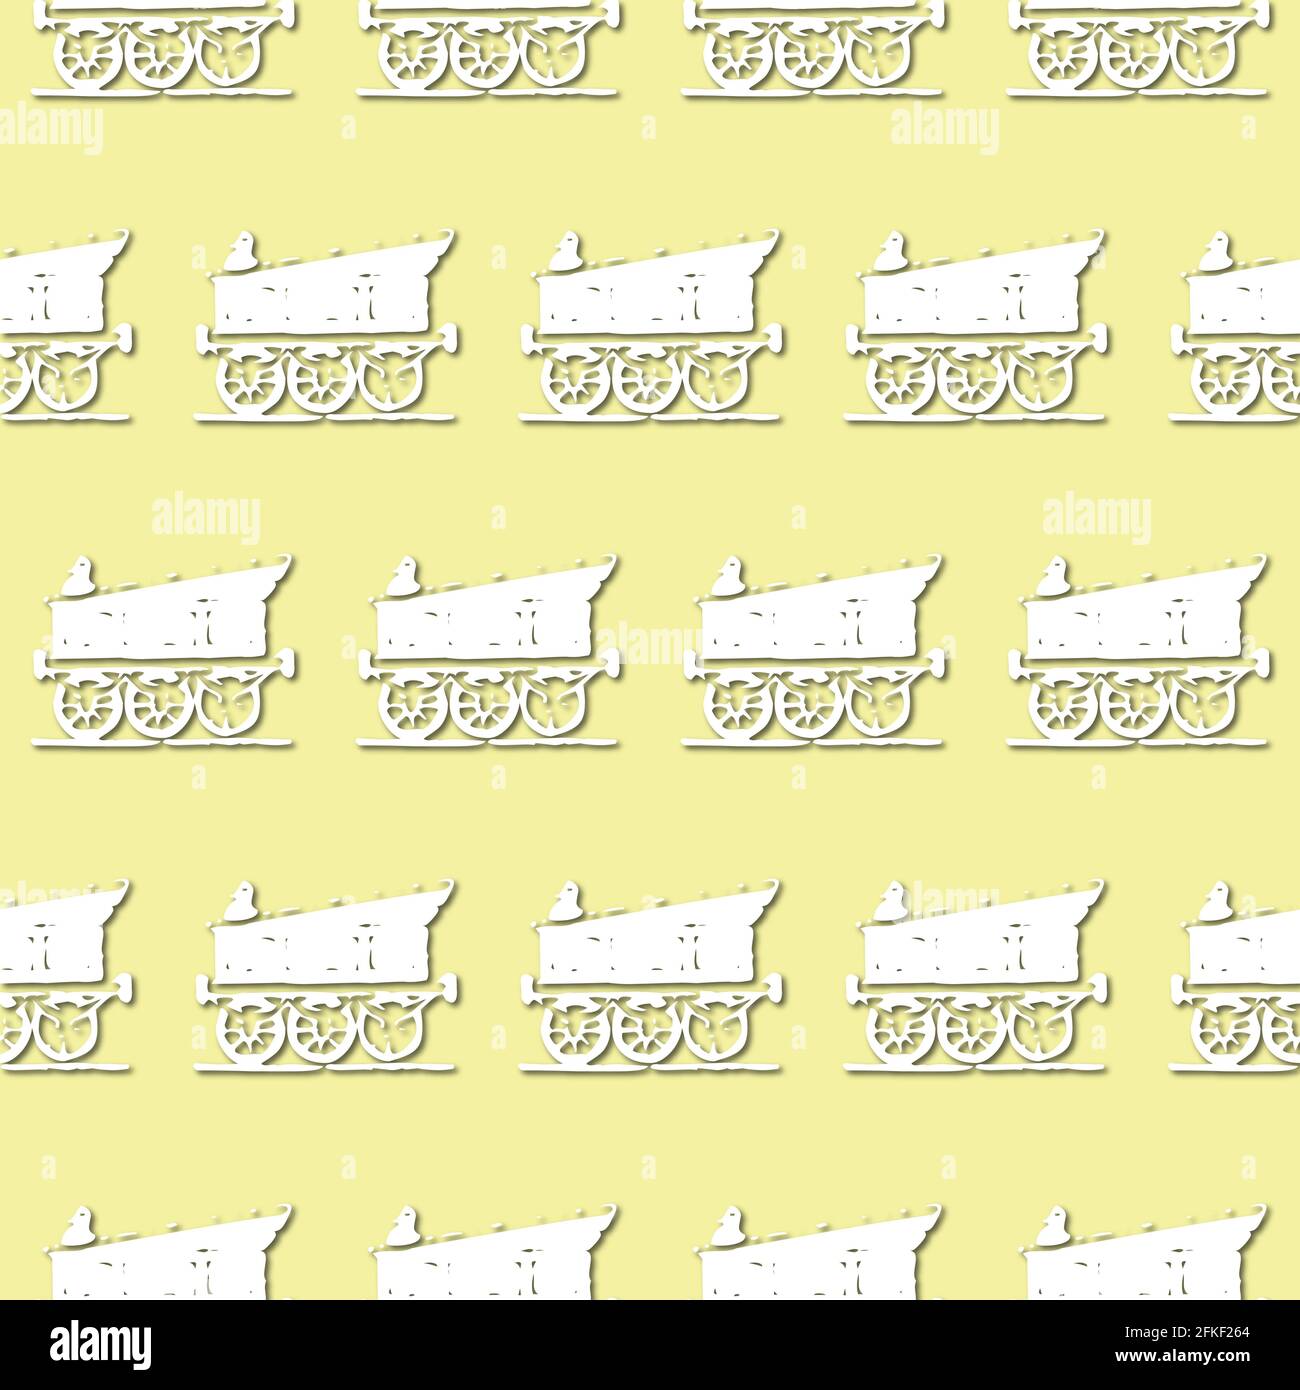 White retro train, locomotive silhouette on pale green background, seamless pattern. Paper cut style with drop shadows and highlights. Stock Photo